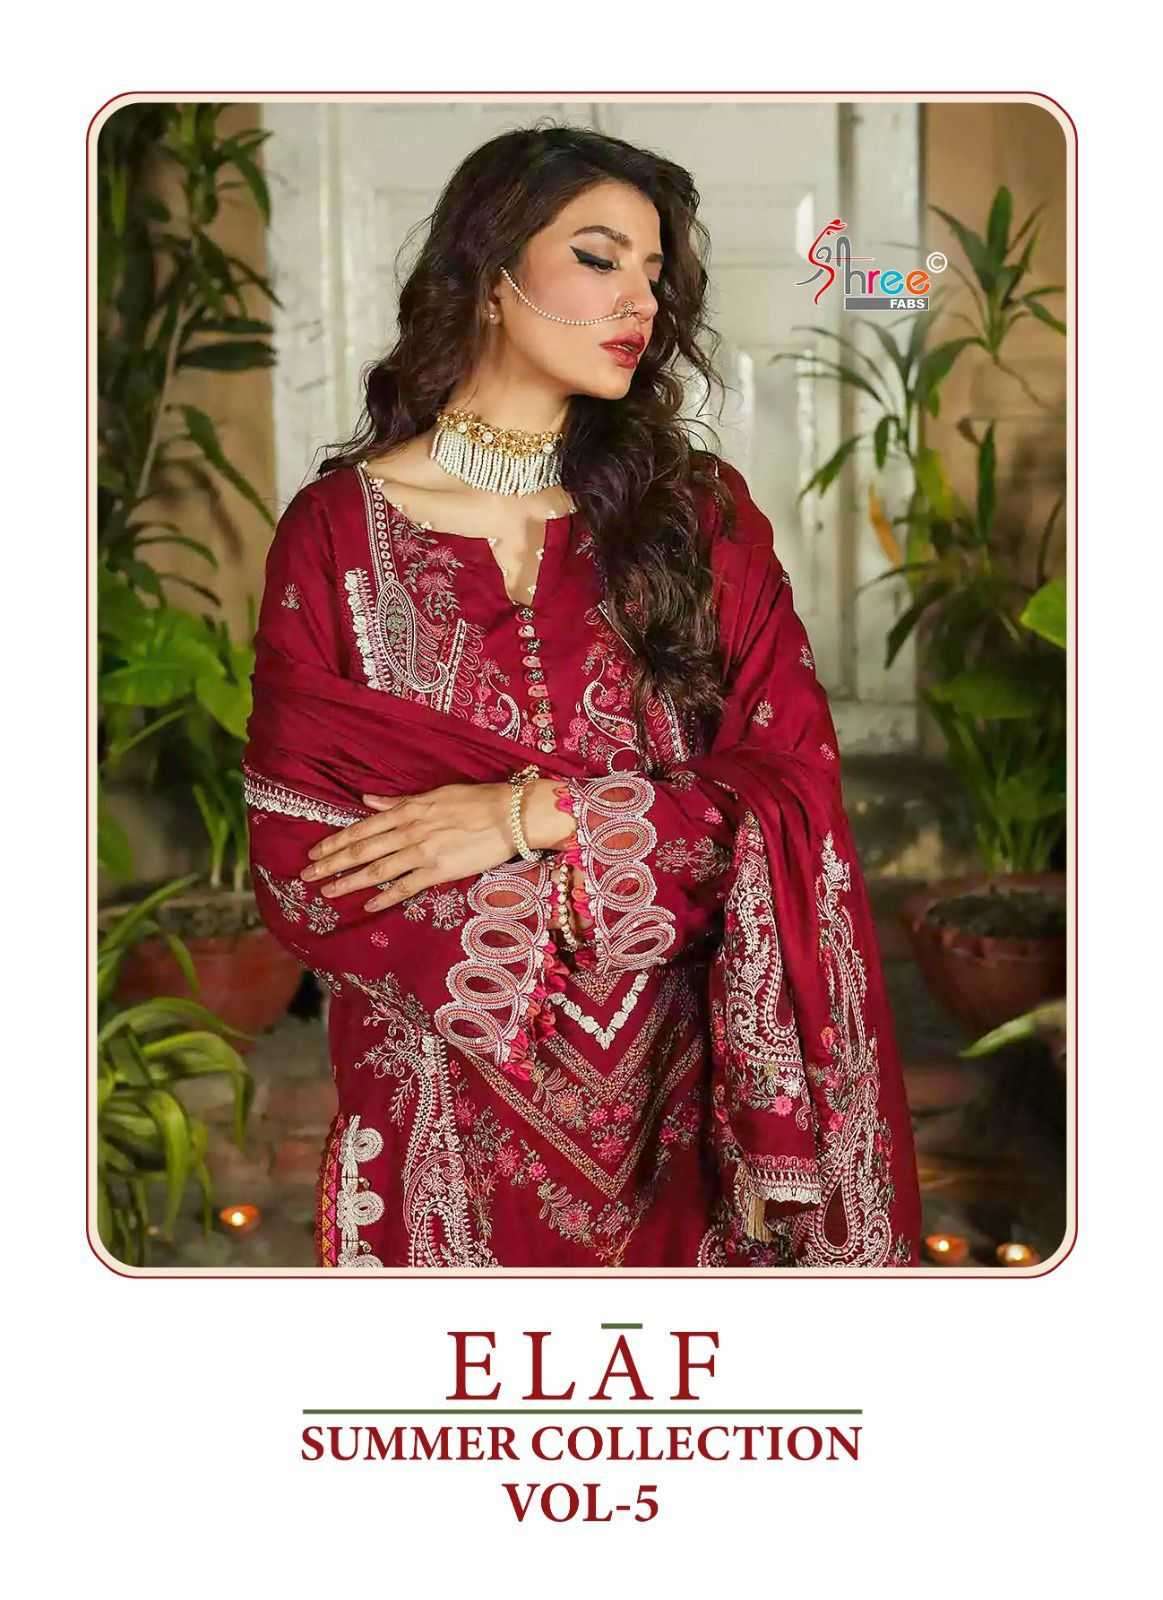 shree fab elaf summer collection vol 5 series 3454-3457 pure rayon cotton suit 